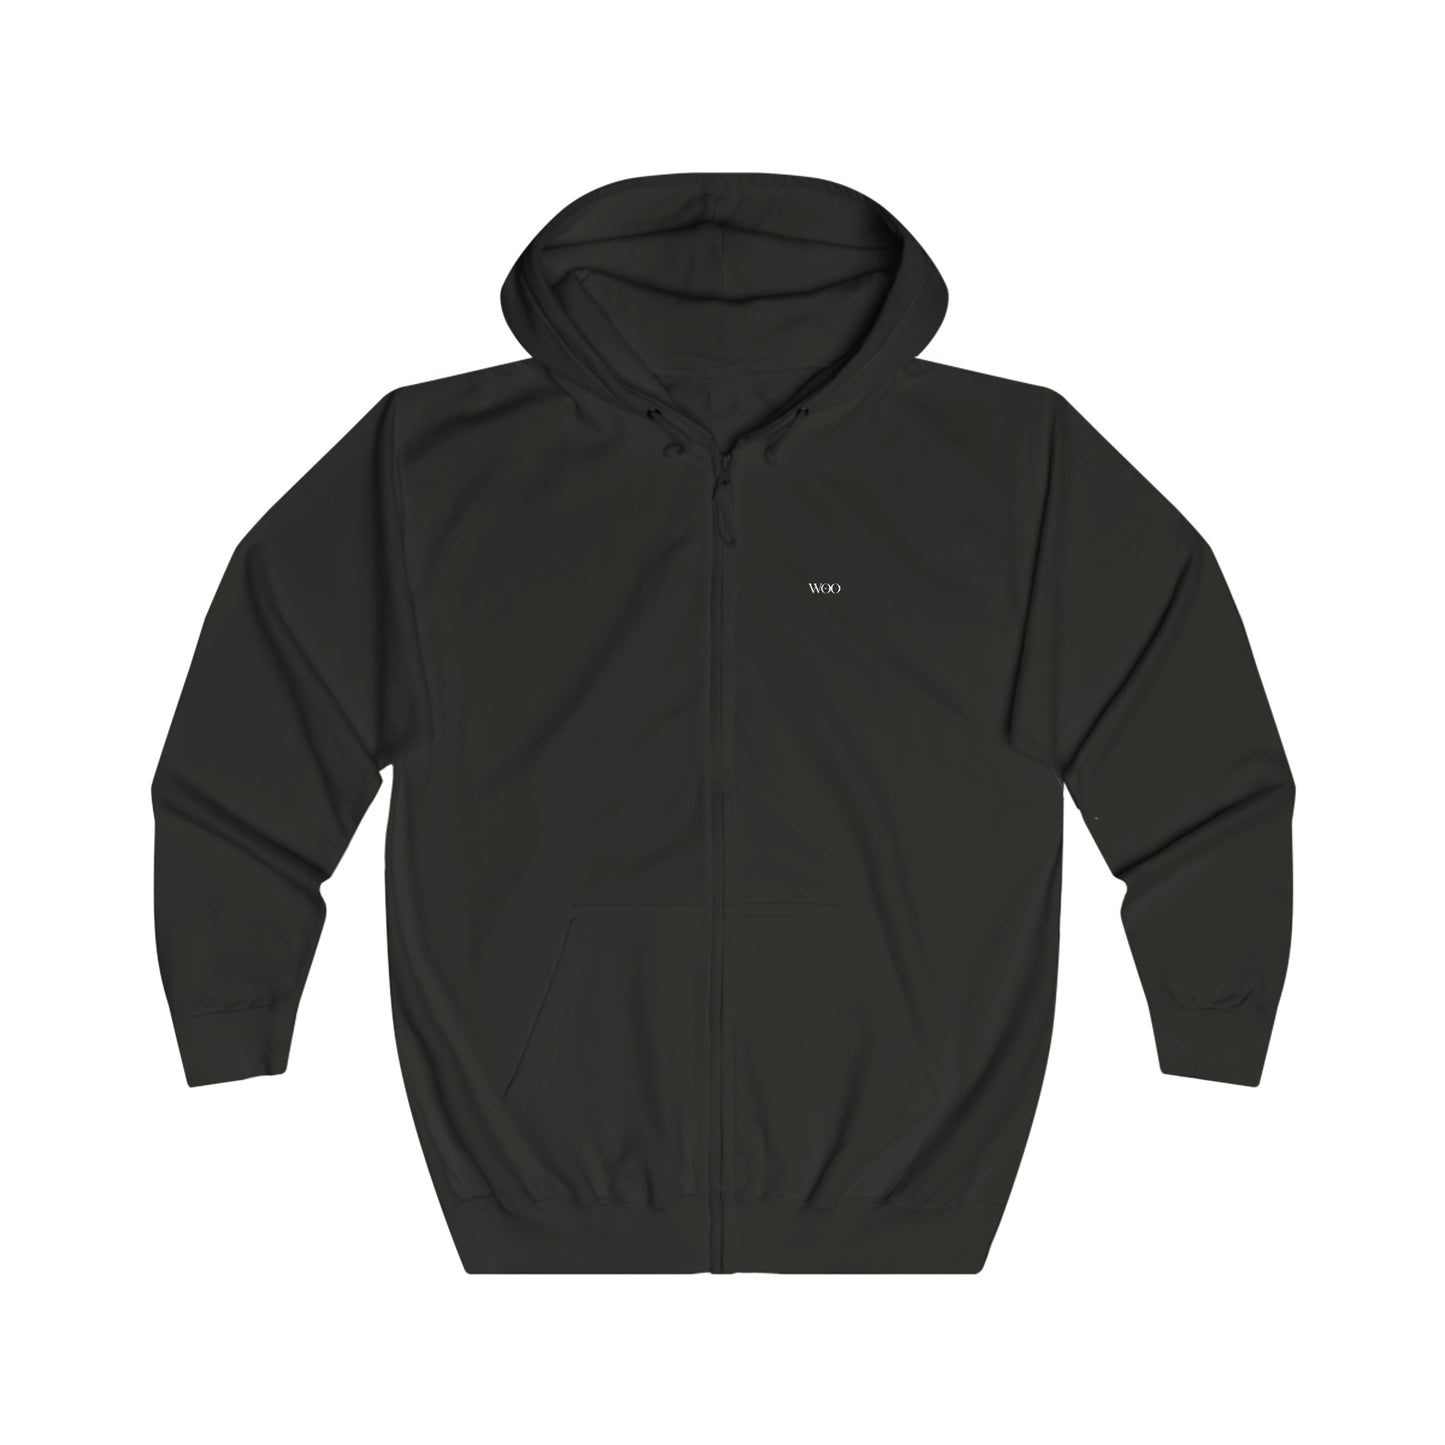 Take This Look from Day to Night by Wearing it to Bed - full zip hoodie